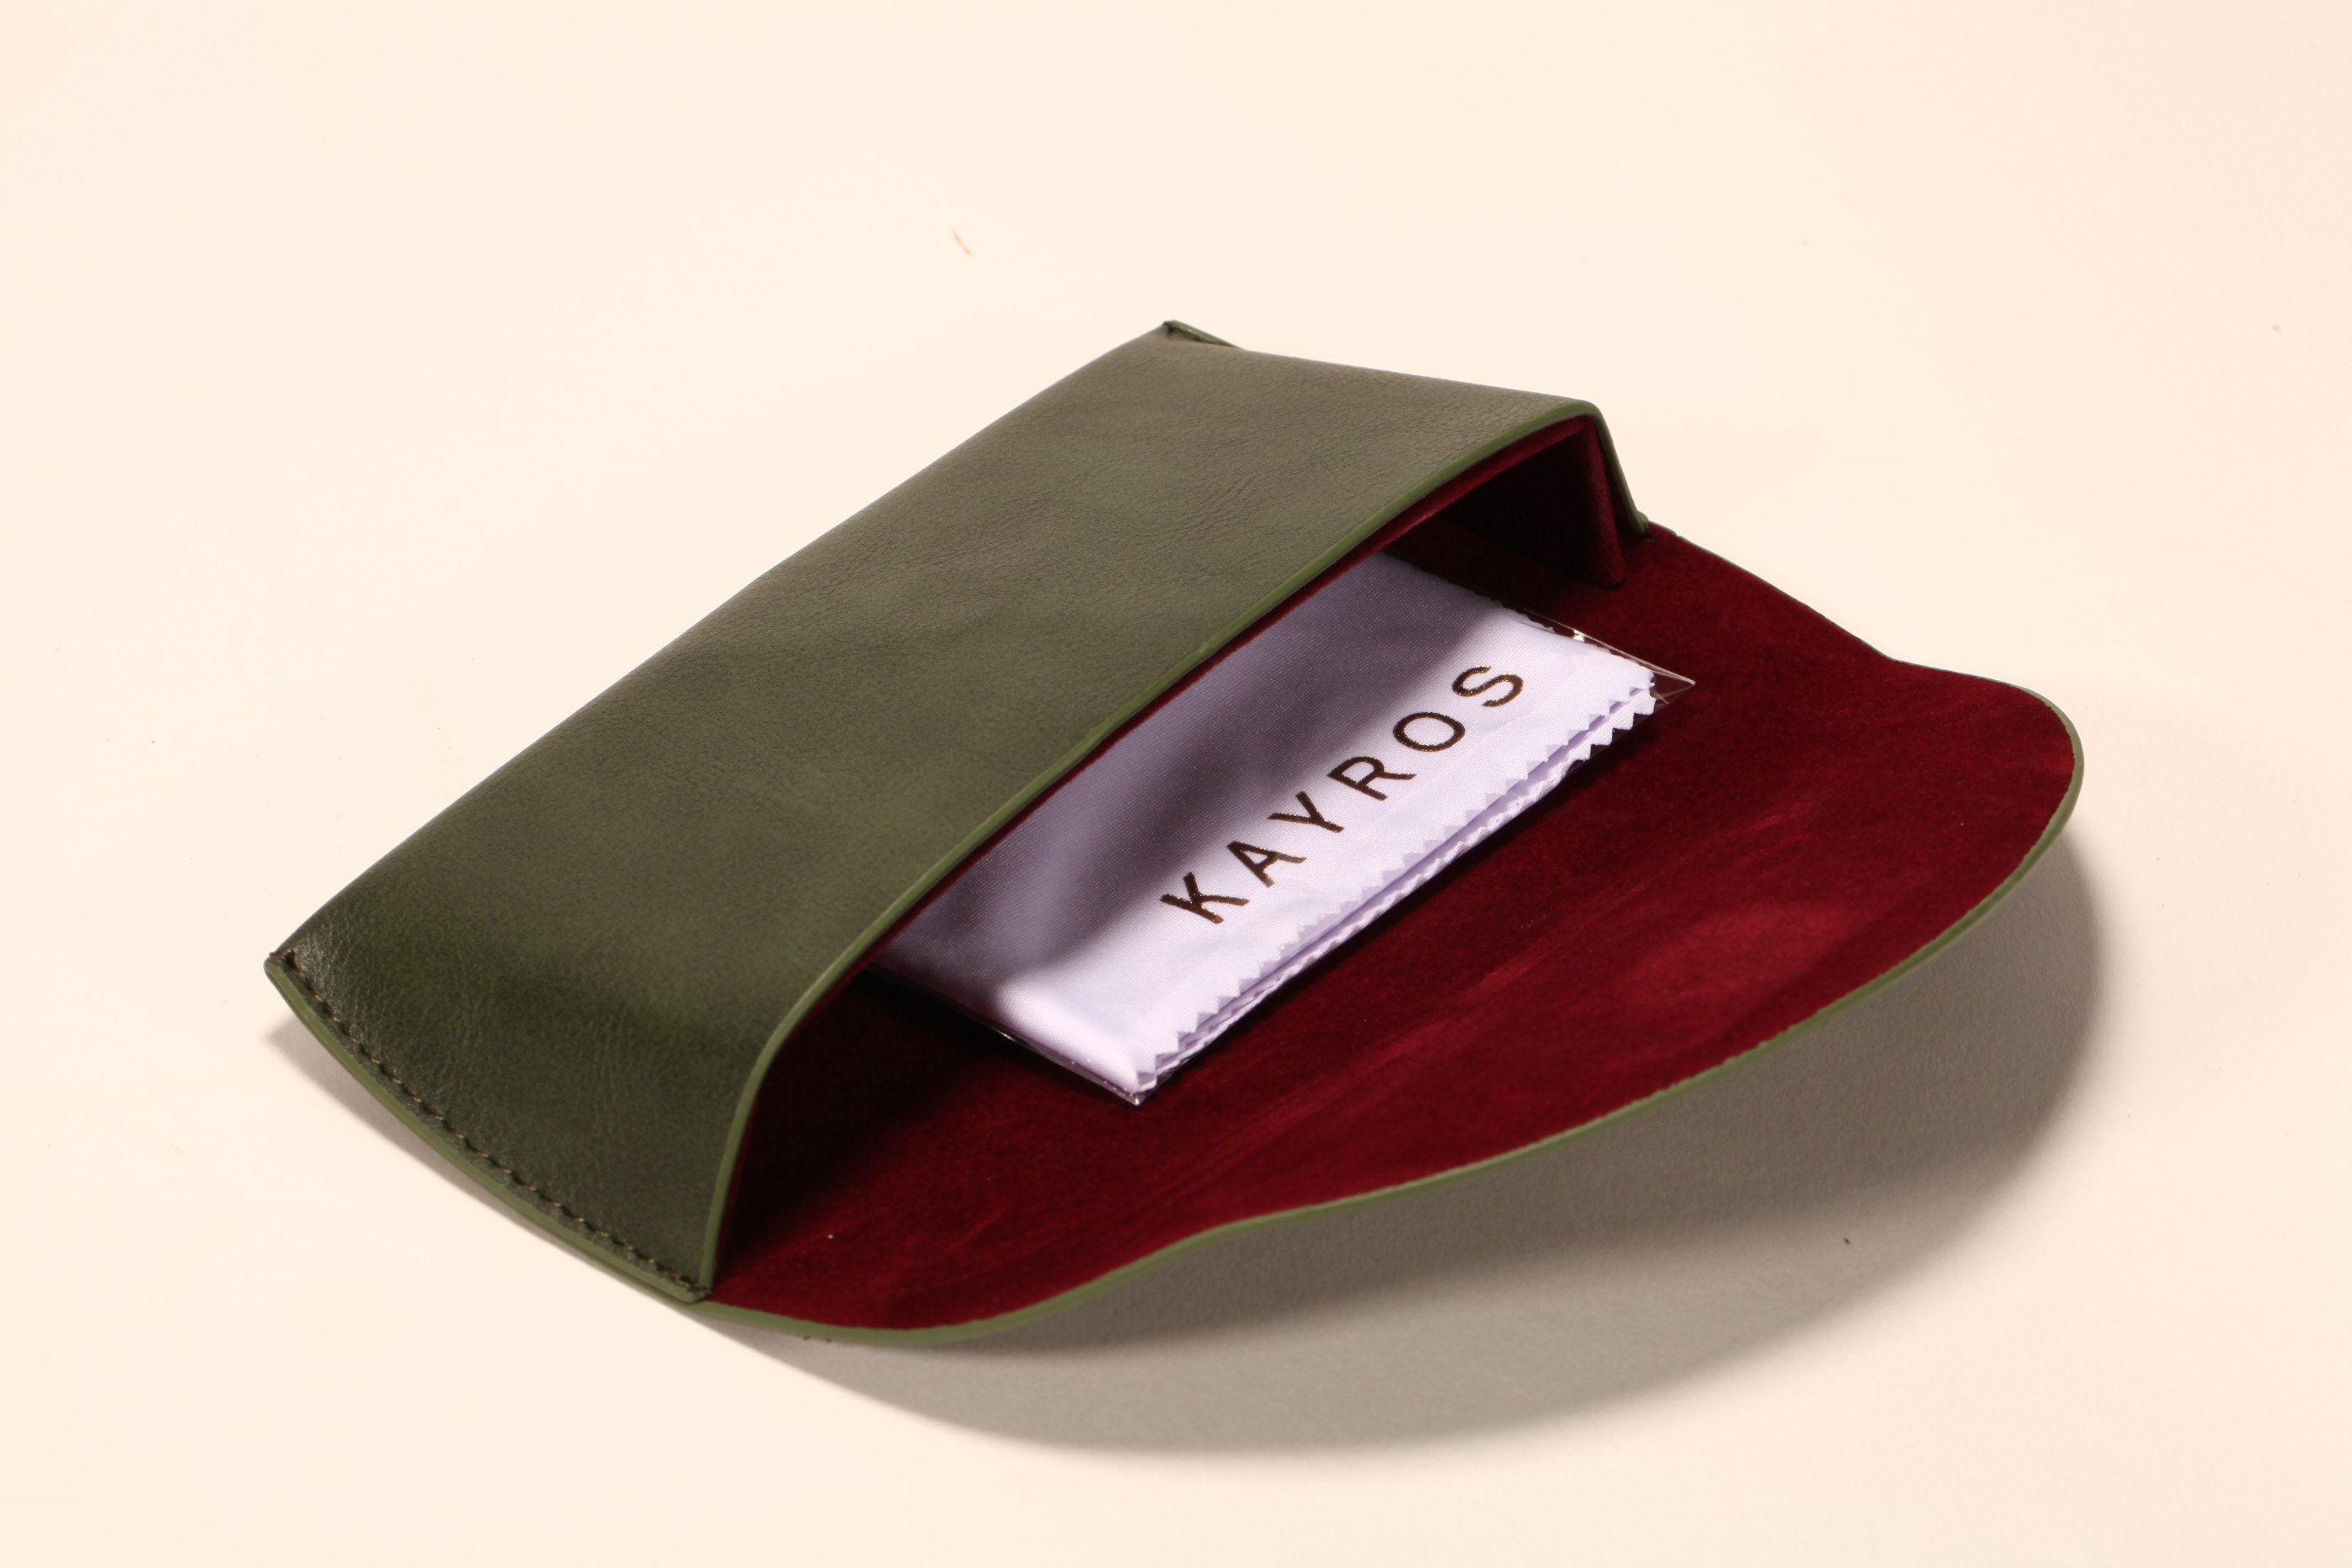 An army-green eyeglass case soft bag with customizable leather, LOGO and color